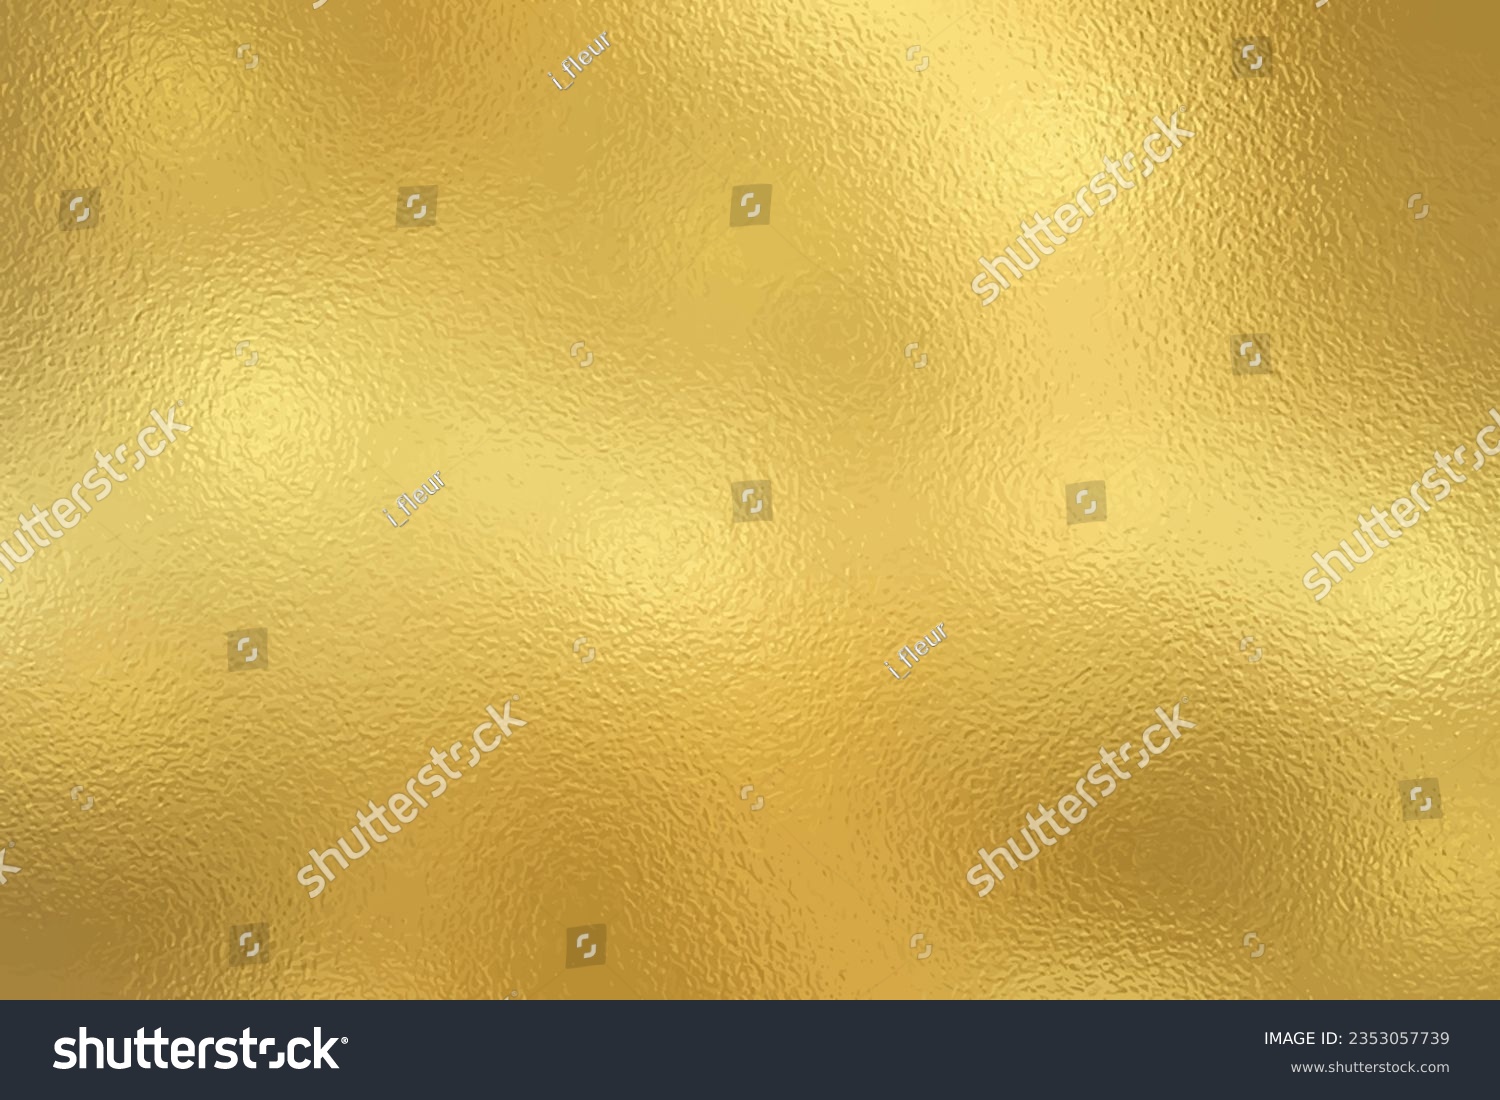 Gold foil texture background with glass effect for print artwork in cmyk color mode, vector eps.10. #2353057739